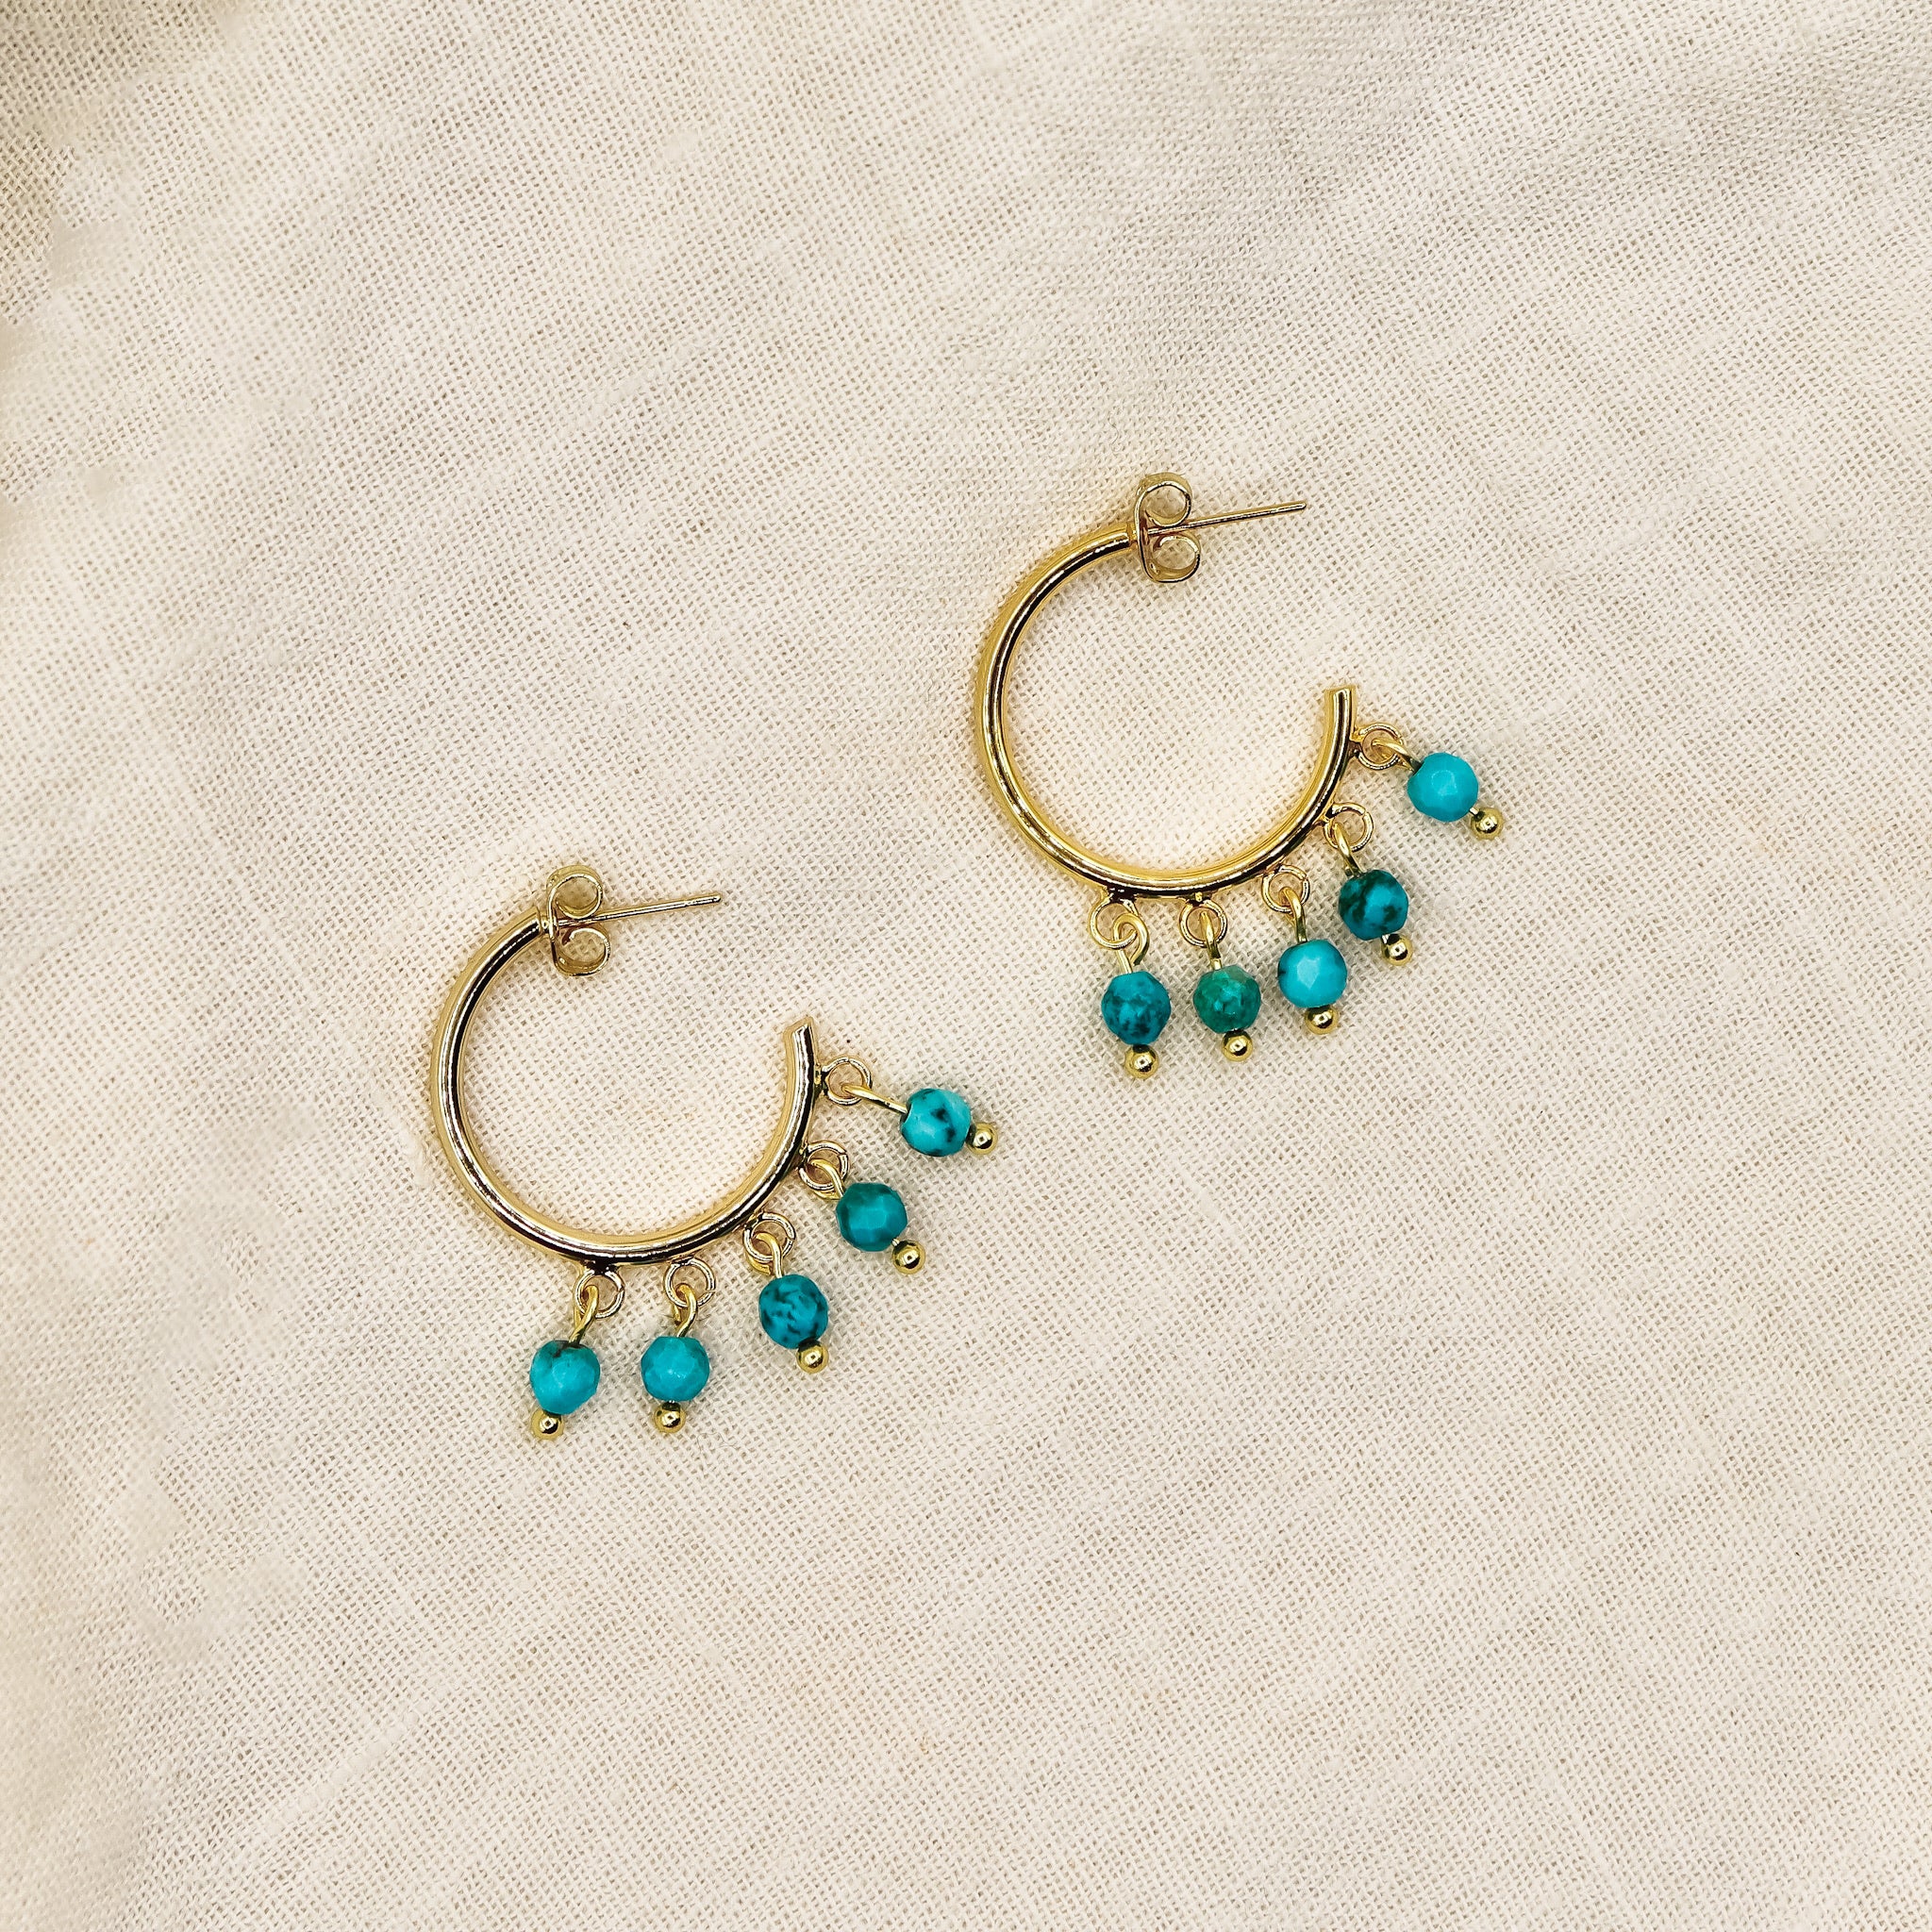 18k Goldplated Turquoise Hoops